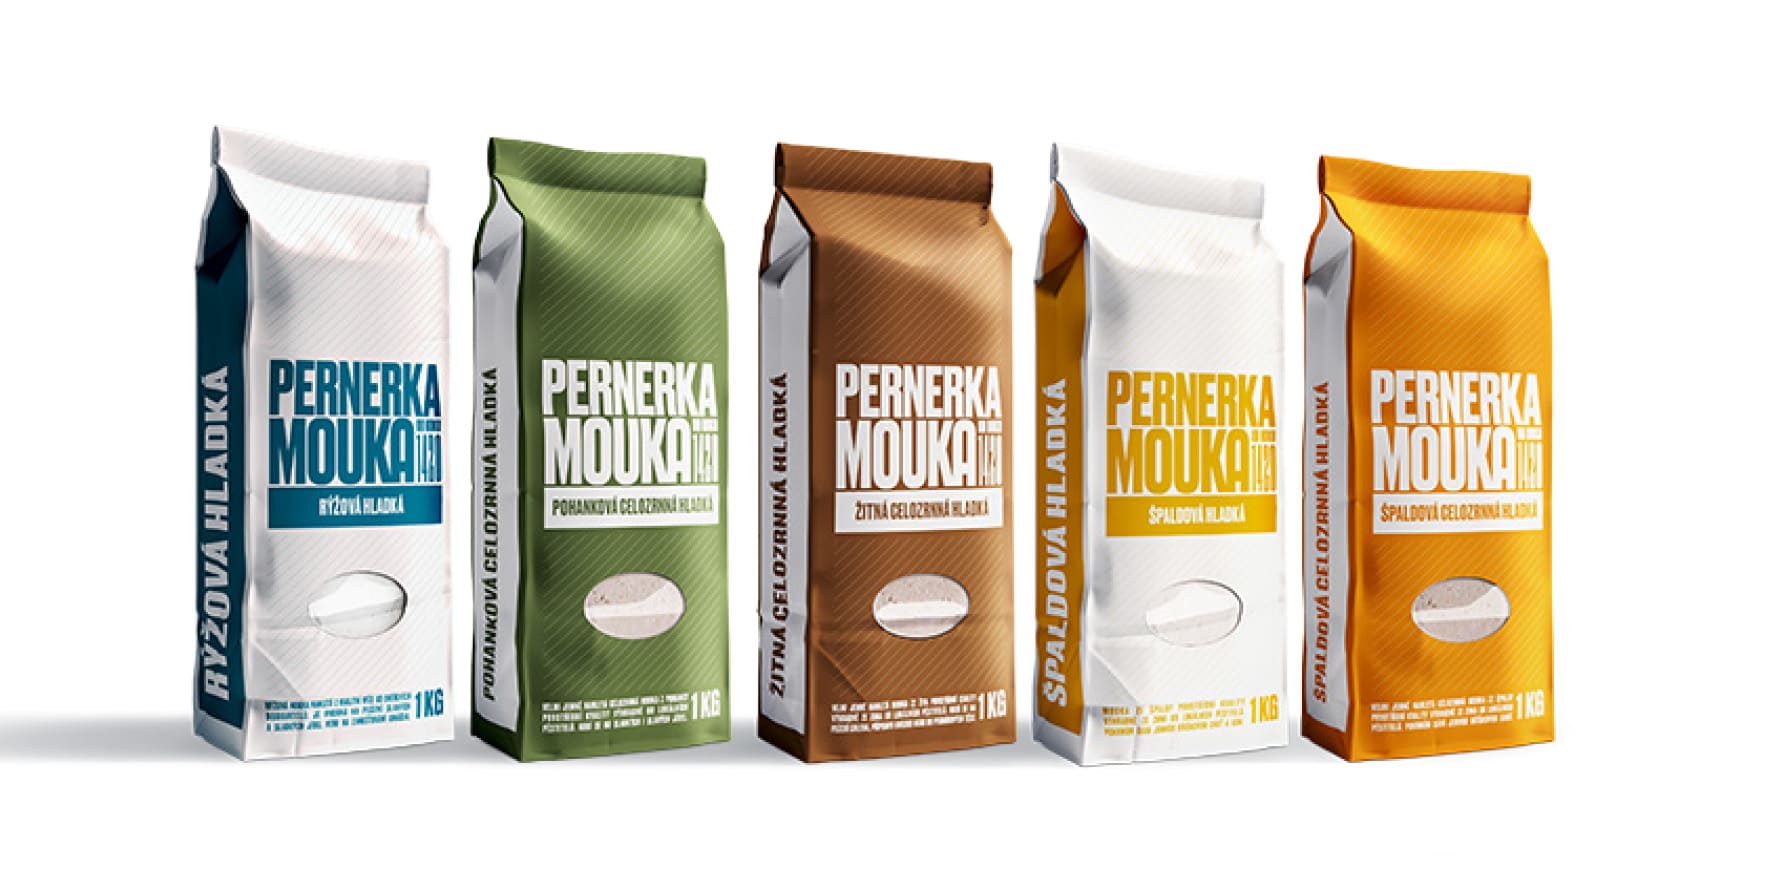 All packages of Pernerka flour.